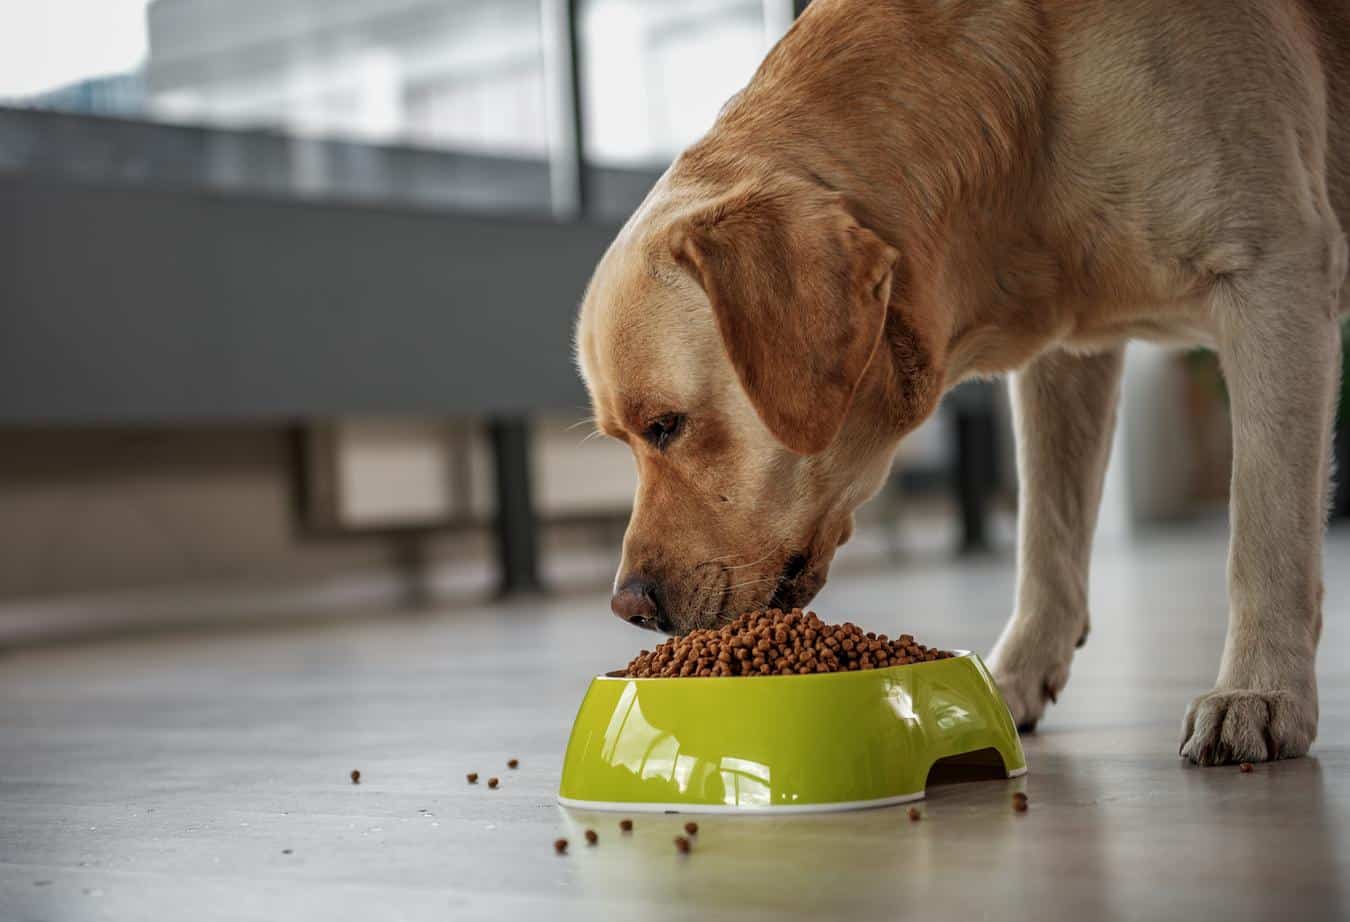 lab eating from dog bowl veterinary advice dental disease food's aroma special treats senior dogs dog's refusal liver cancer stop eating food baby food